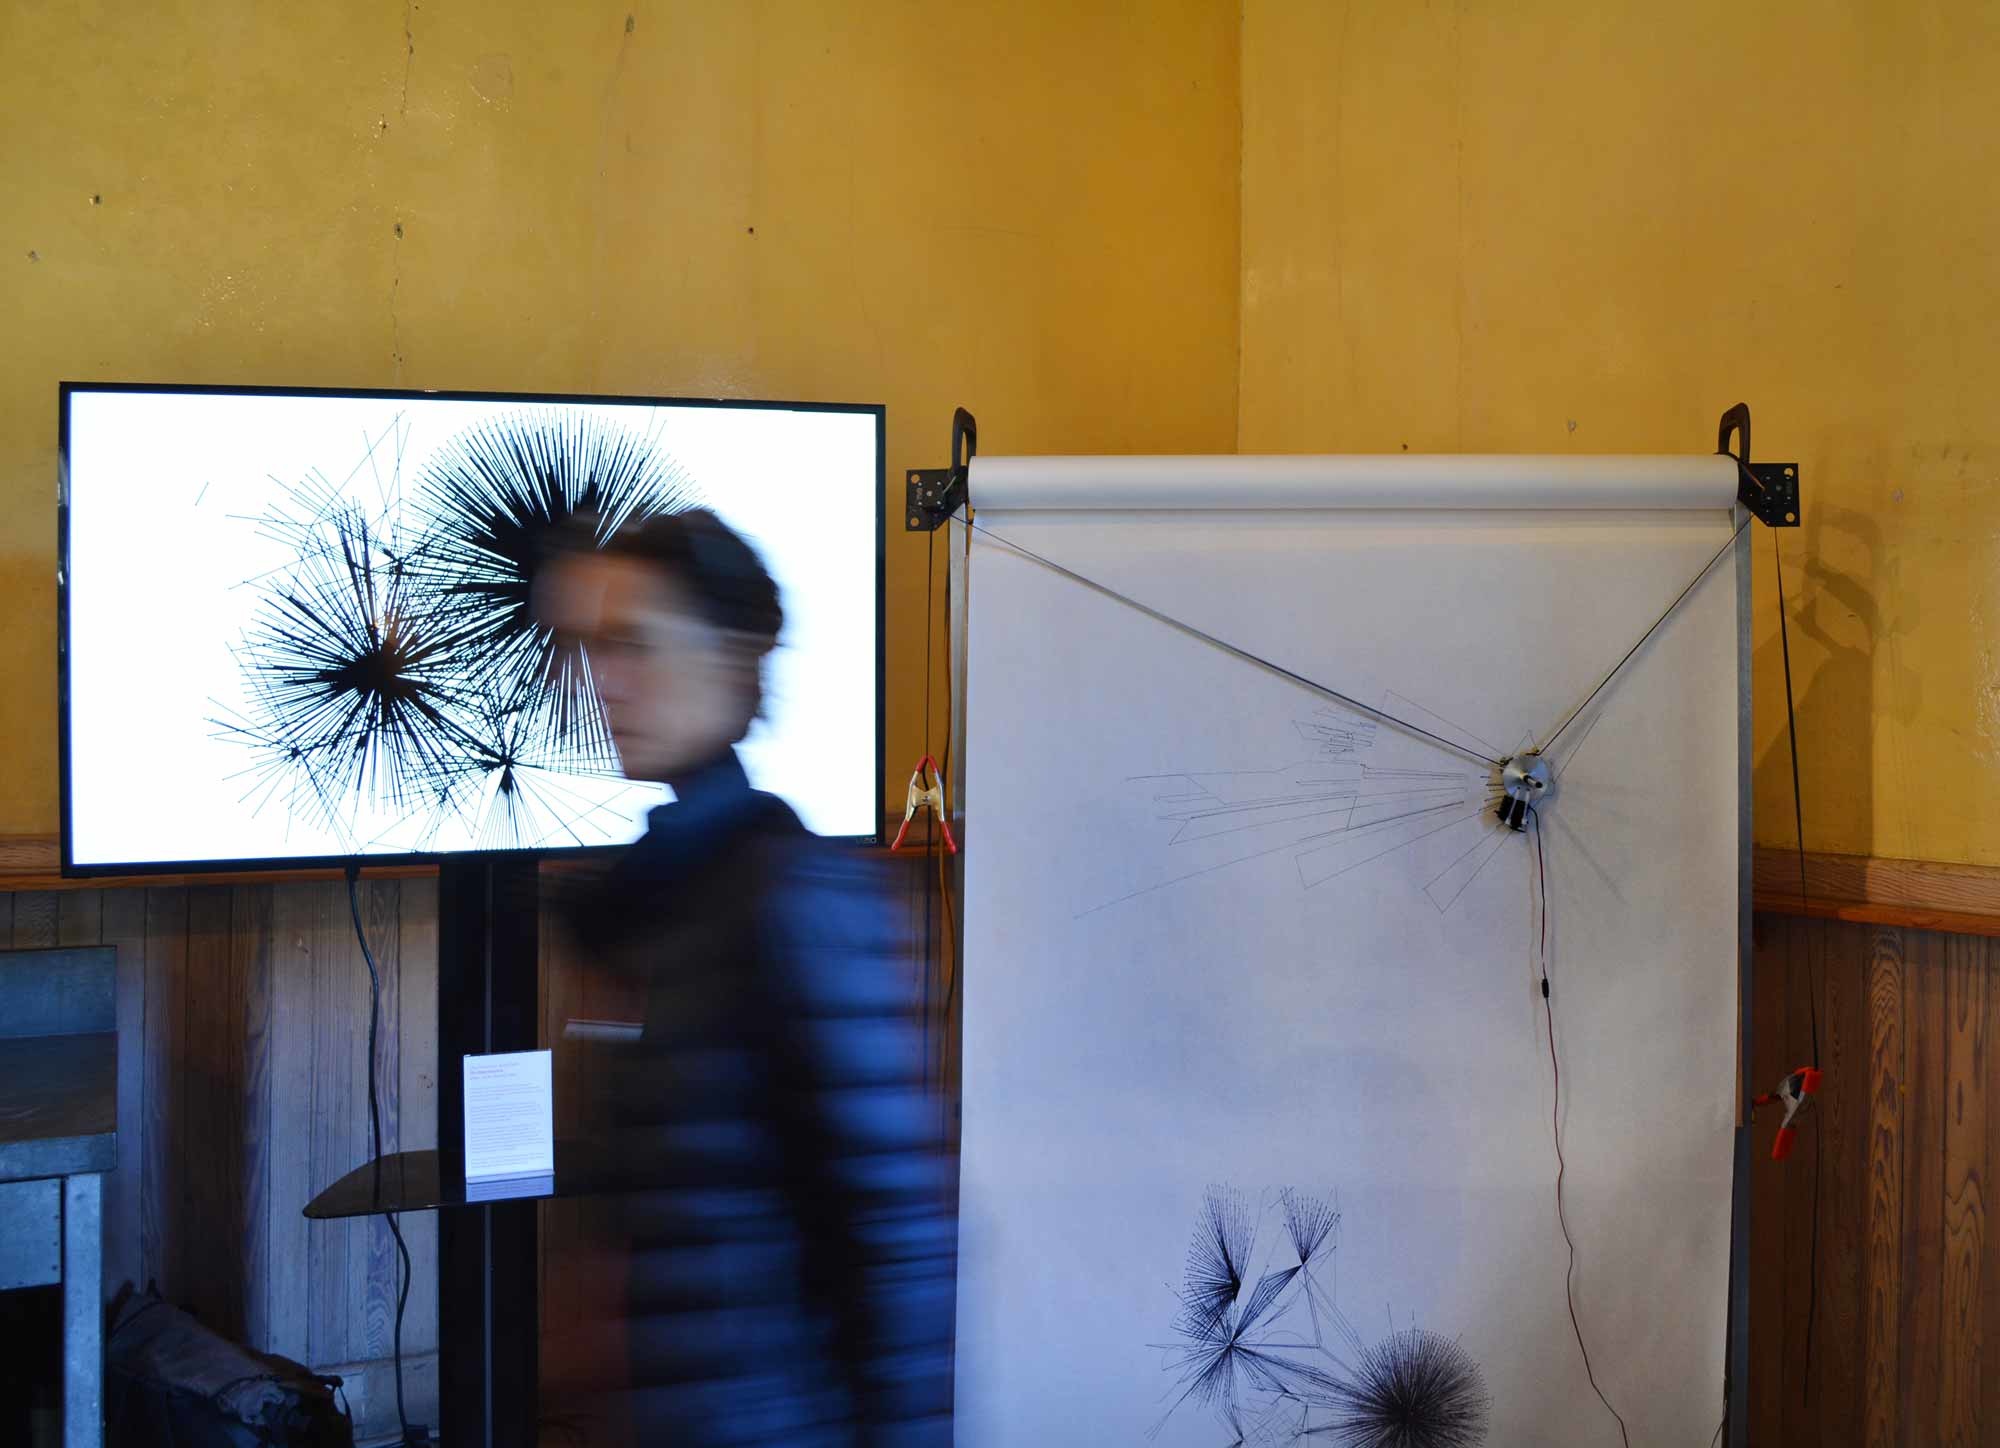 In a warm yellow room, a large video monitor displaying radiating forms stands beside a drawing machine marking a long paper scroll, as a visitor with a motion blurred face walks past.